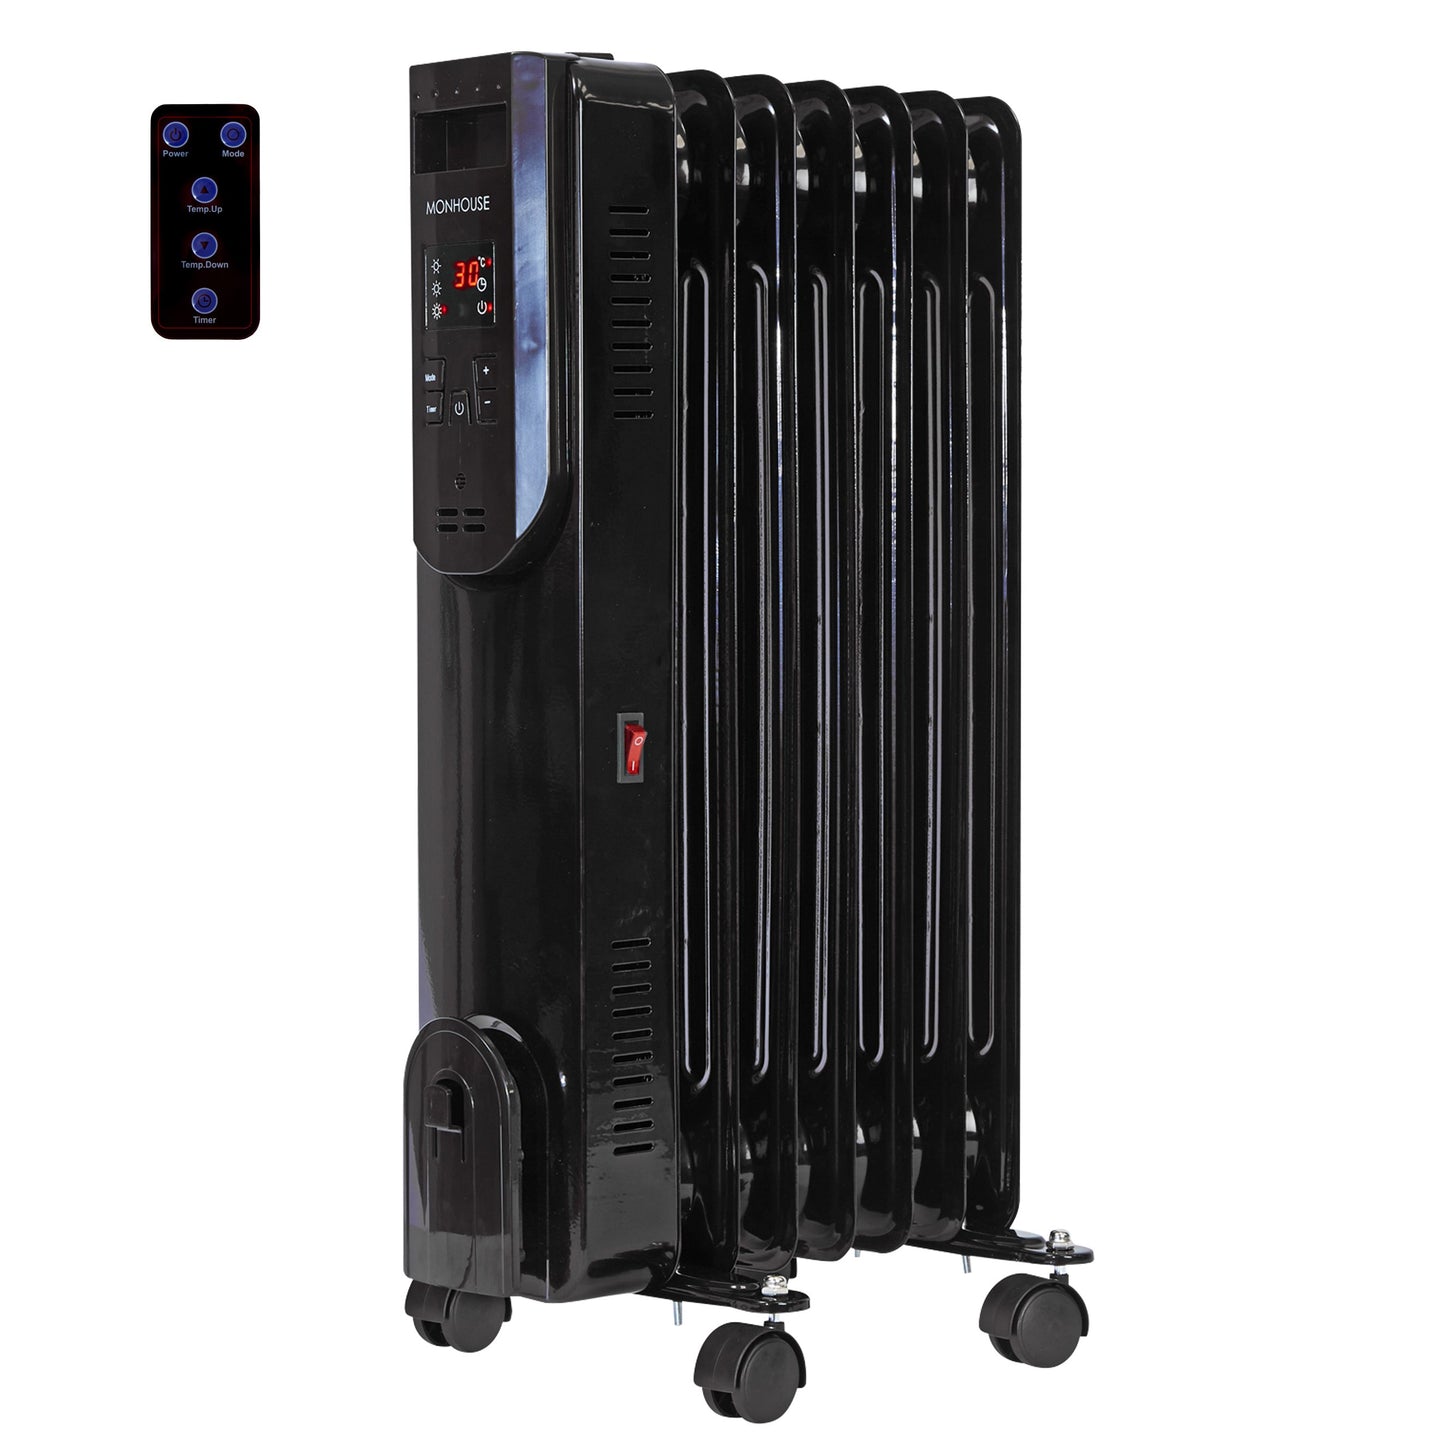 Load image into Gallery viewer, Digital Oil Filled Electric Heater Remote Control Powerful 7-11 Fins 600-2500W
